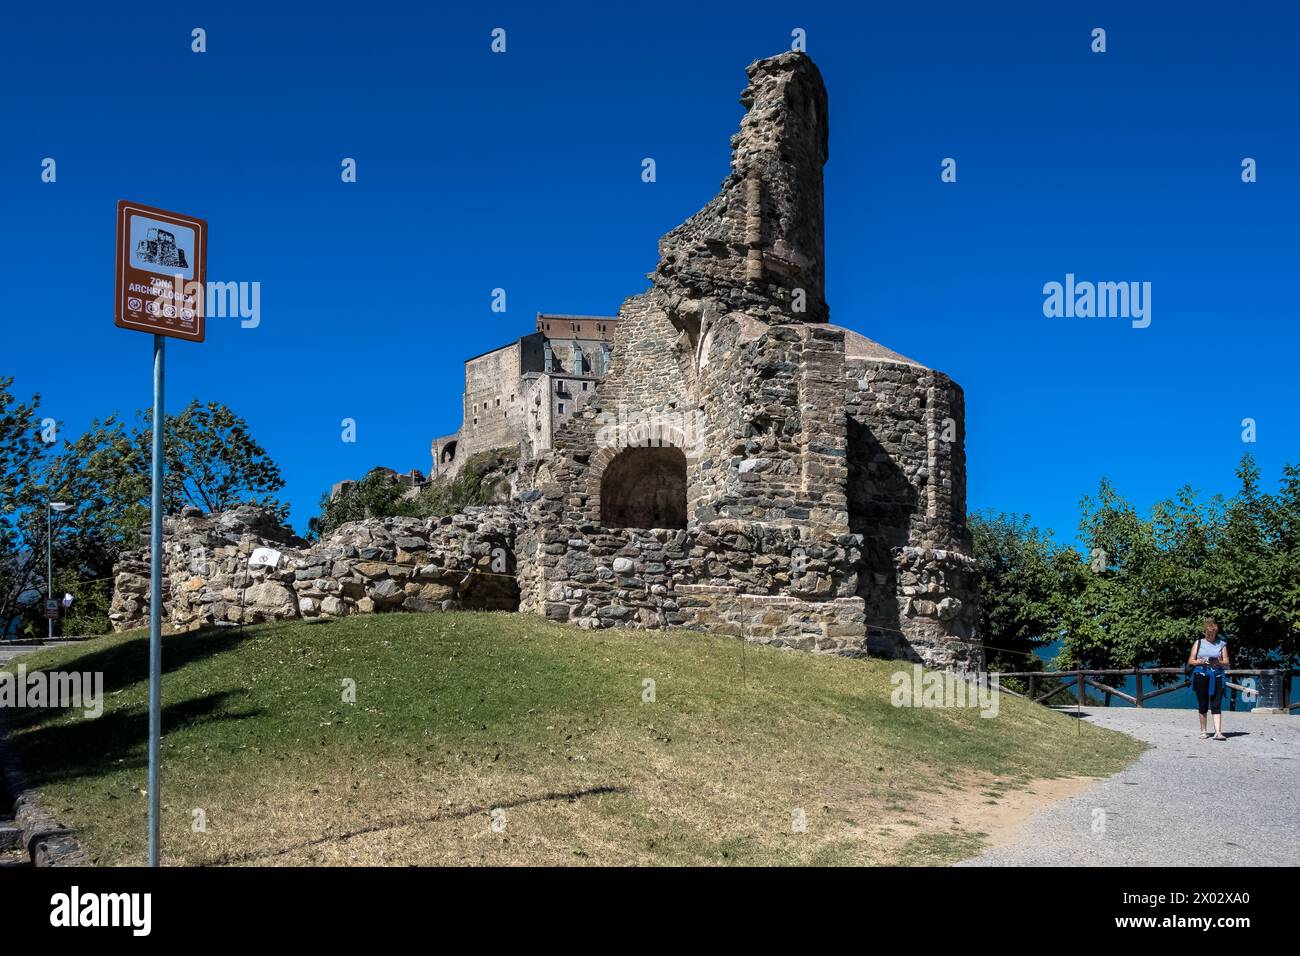 Detail of the Sacra di San Michele (Saint Michael's Abbey), a religious complex on Mount Pirchiriano, on south side of the Val di Susa Stock Photo